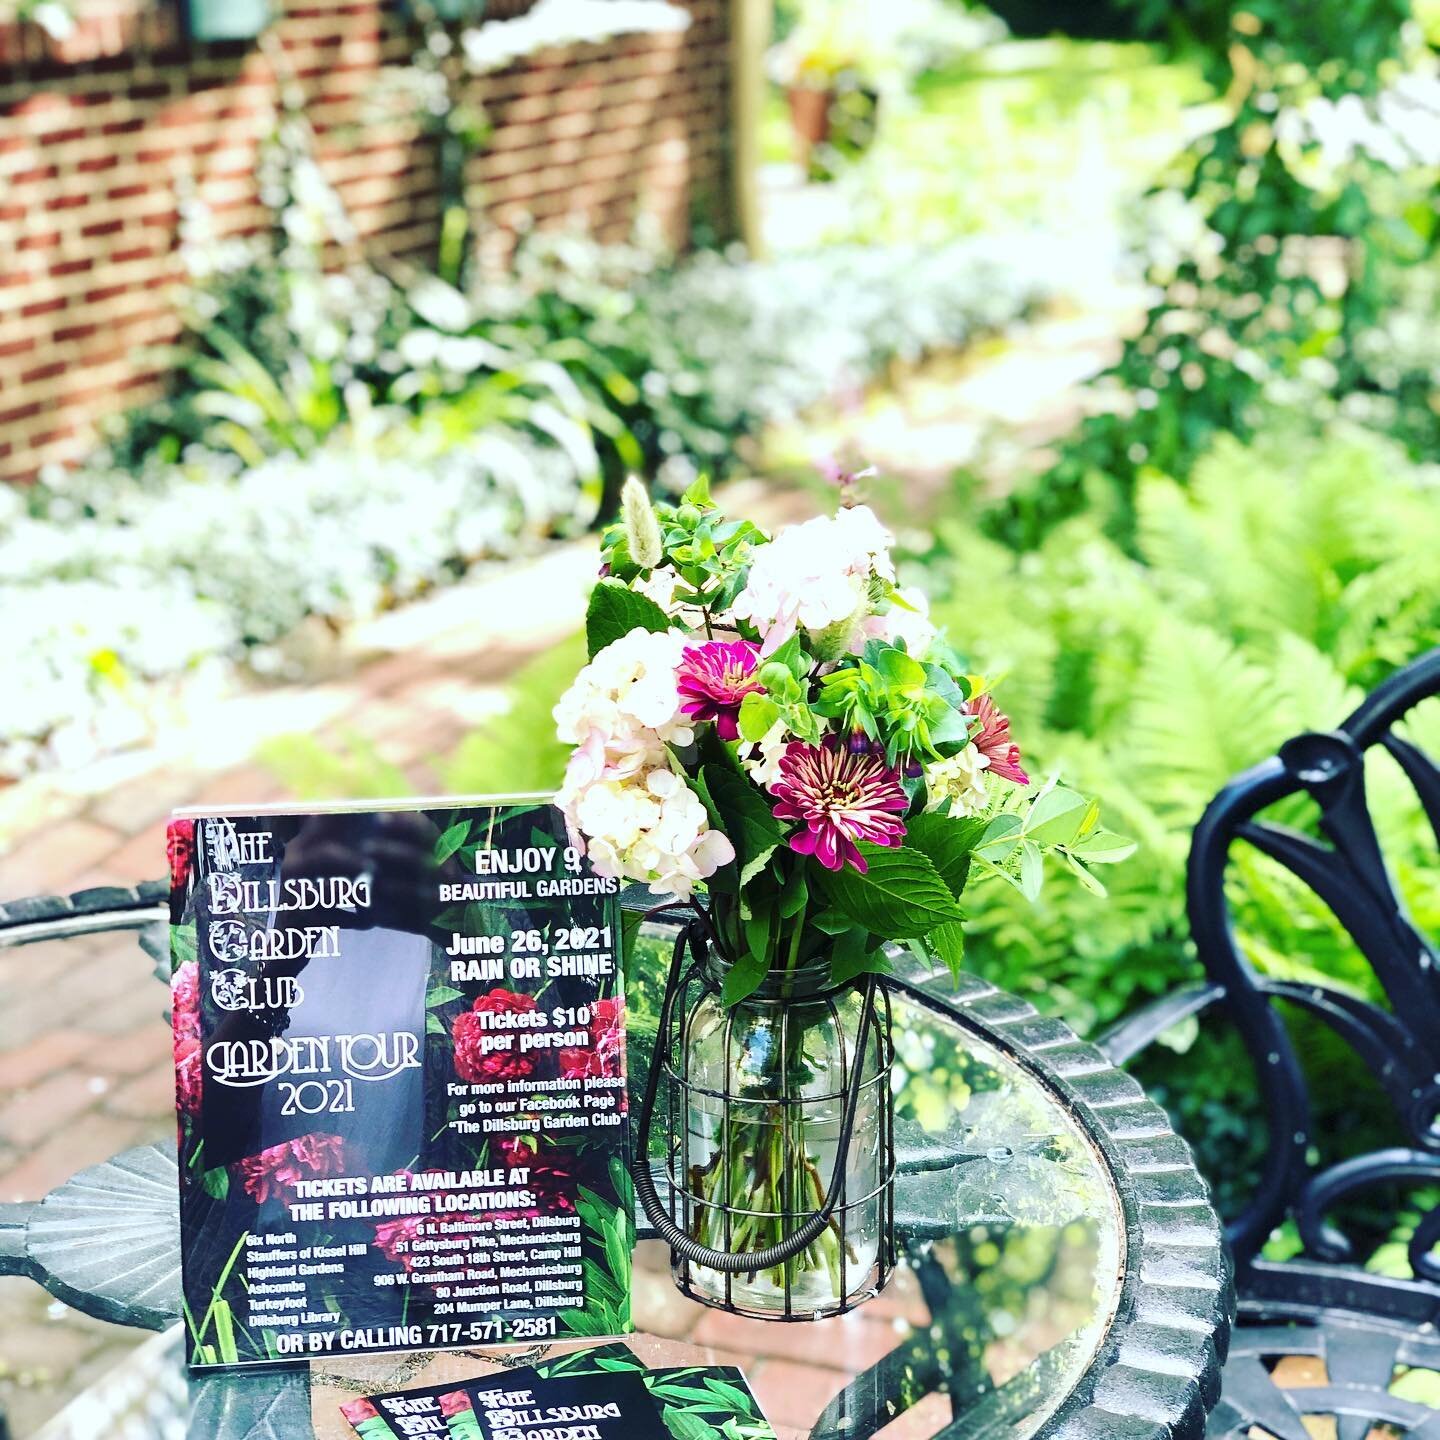 Super honored to be able to share our secret garden with the @Dillsburggardenclub tour today.

We hope to participate in their future tour so everyone can see the continued work as we really begin work to restore the gardens to their full glory. 

An